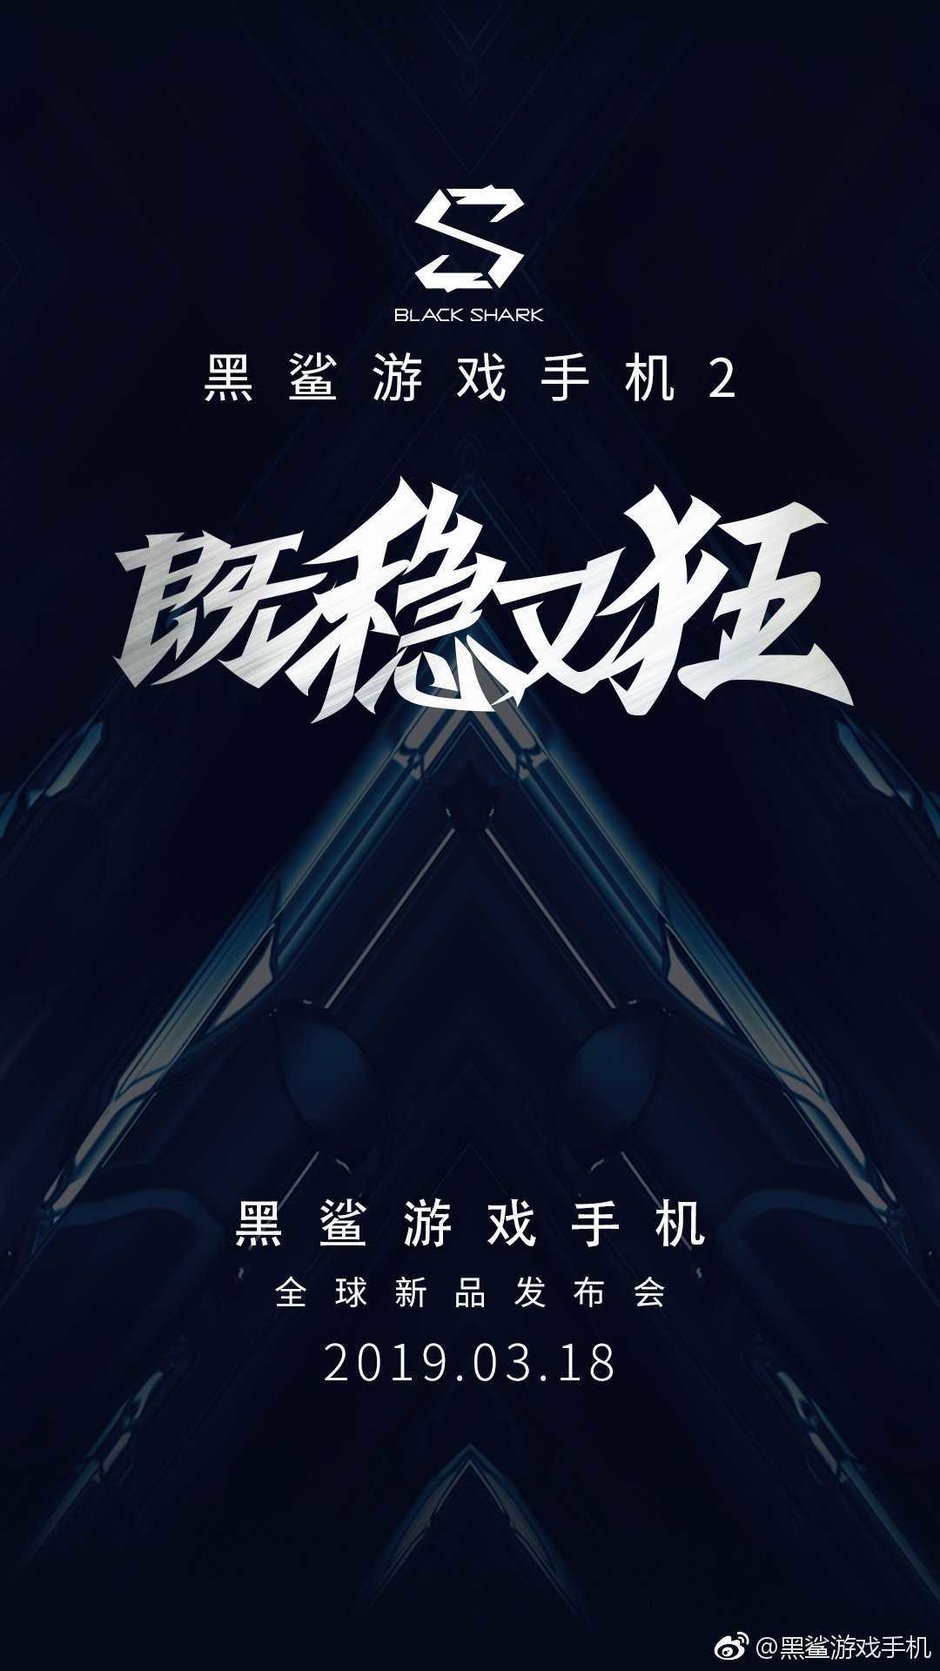 We now know the release date of Xiaomi Black Shark 2